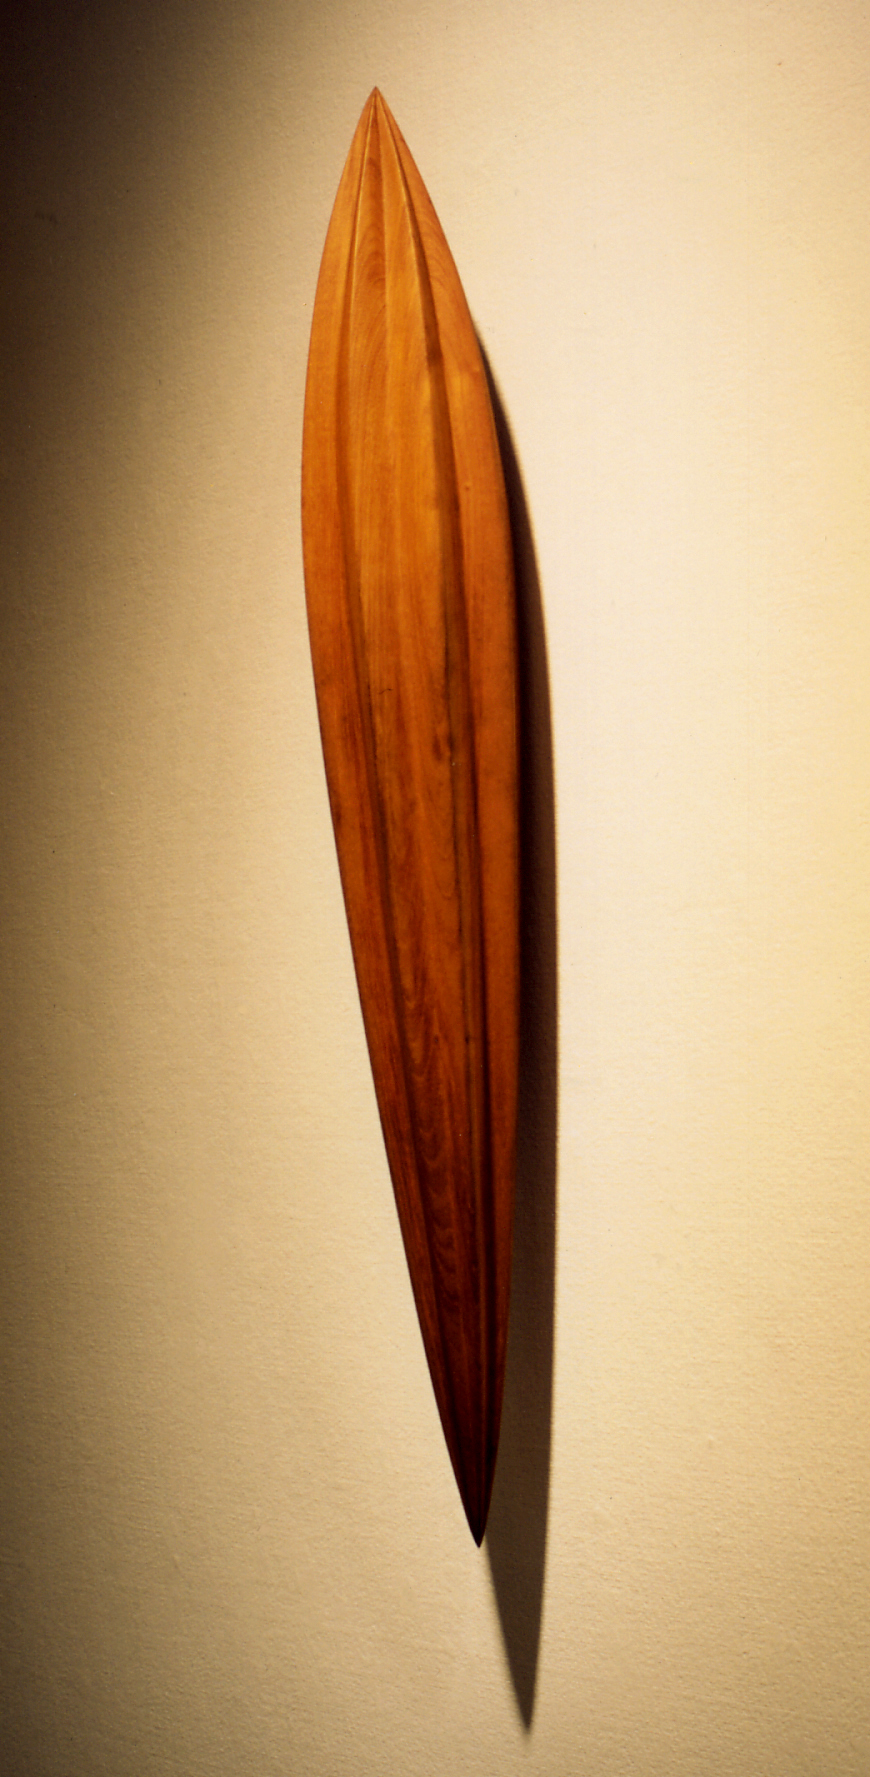 "Ship and Seed in Meditation-M2" Wood [Zelkova] 10×10×70cm